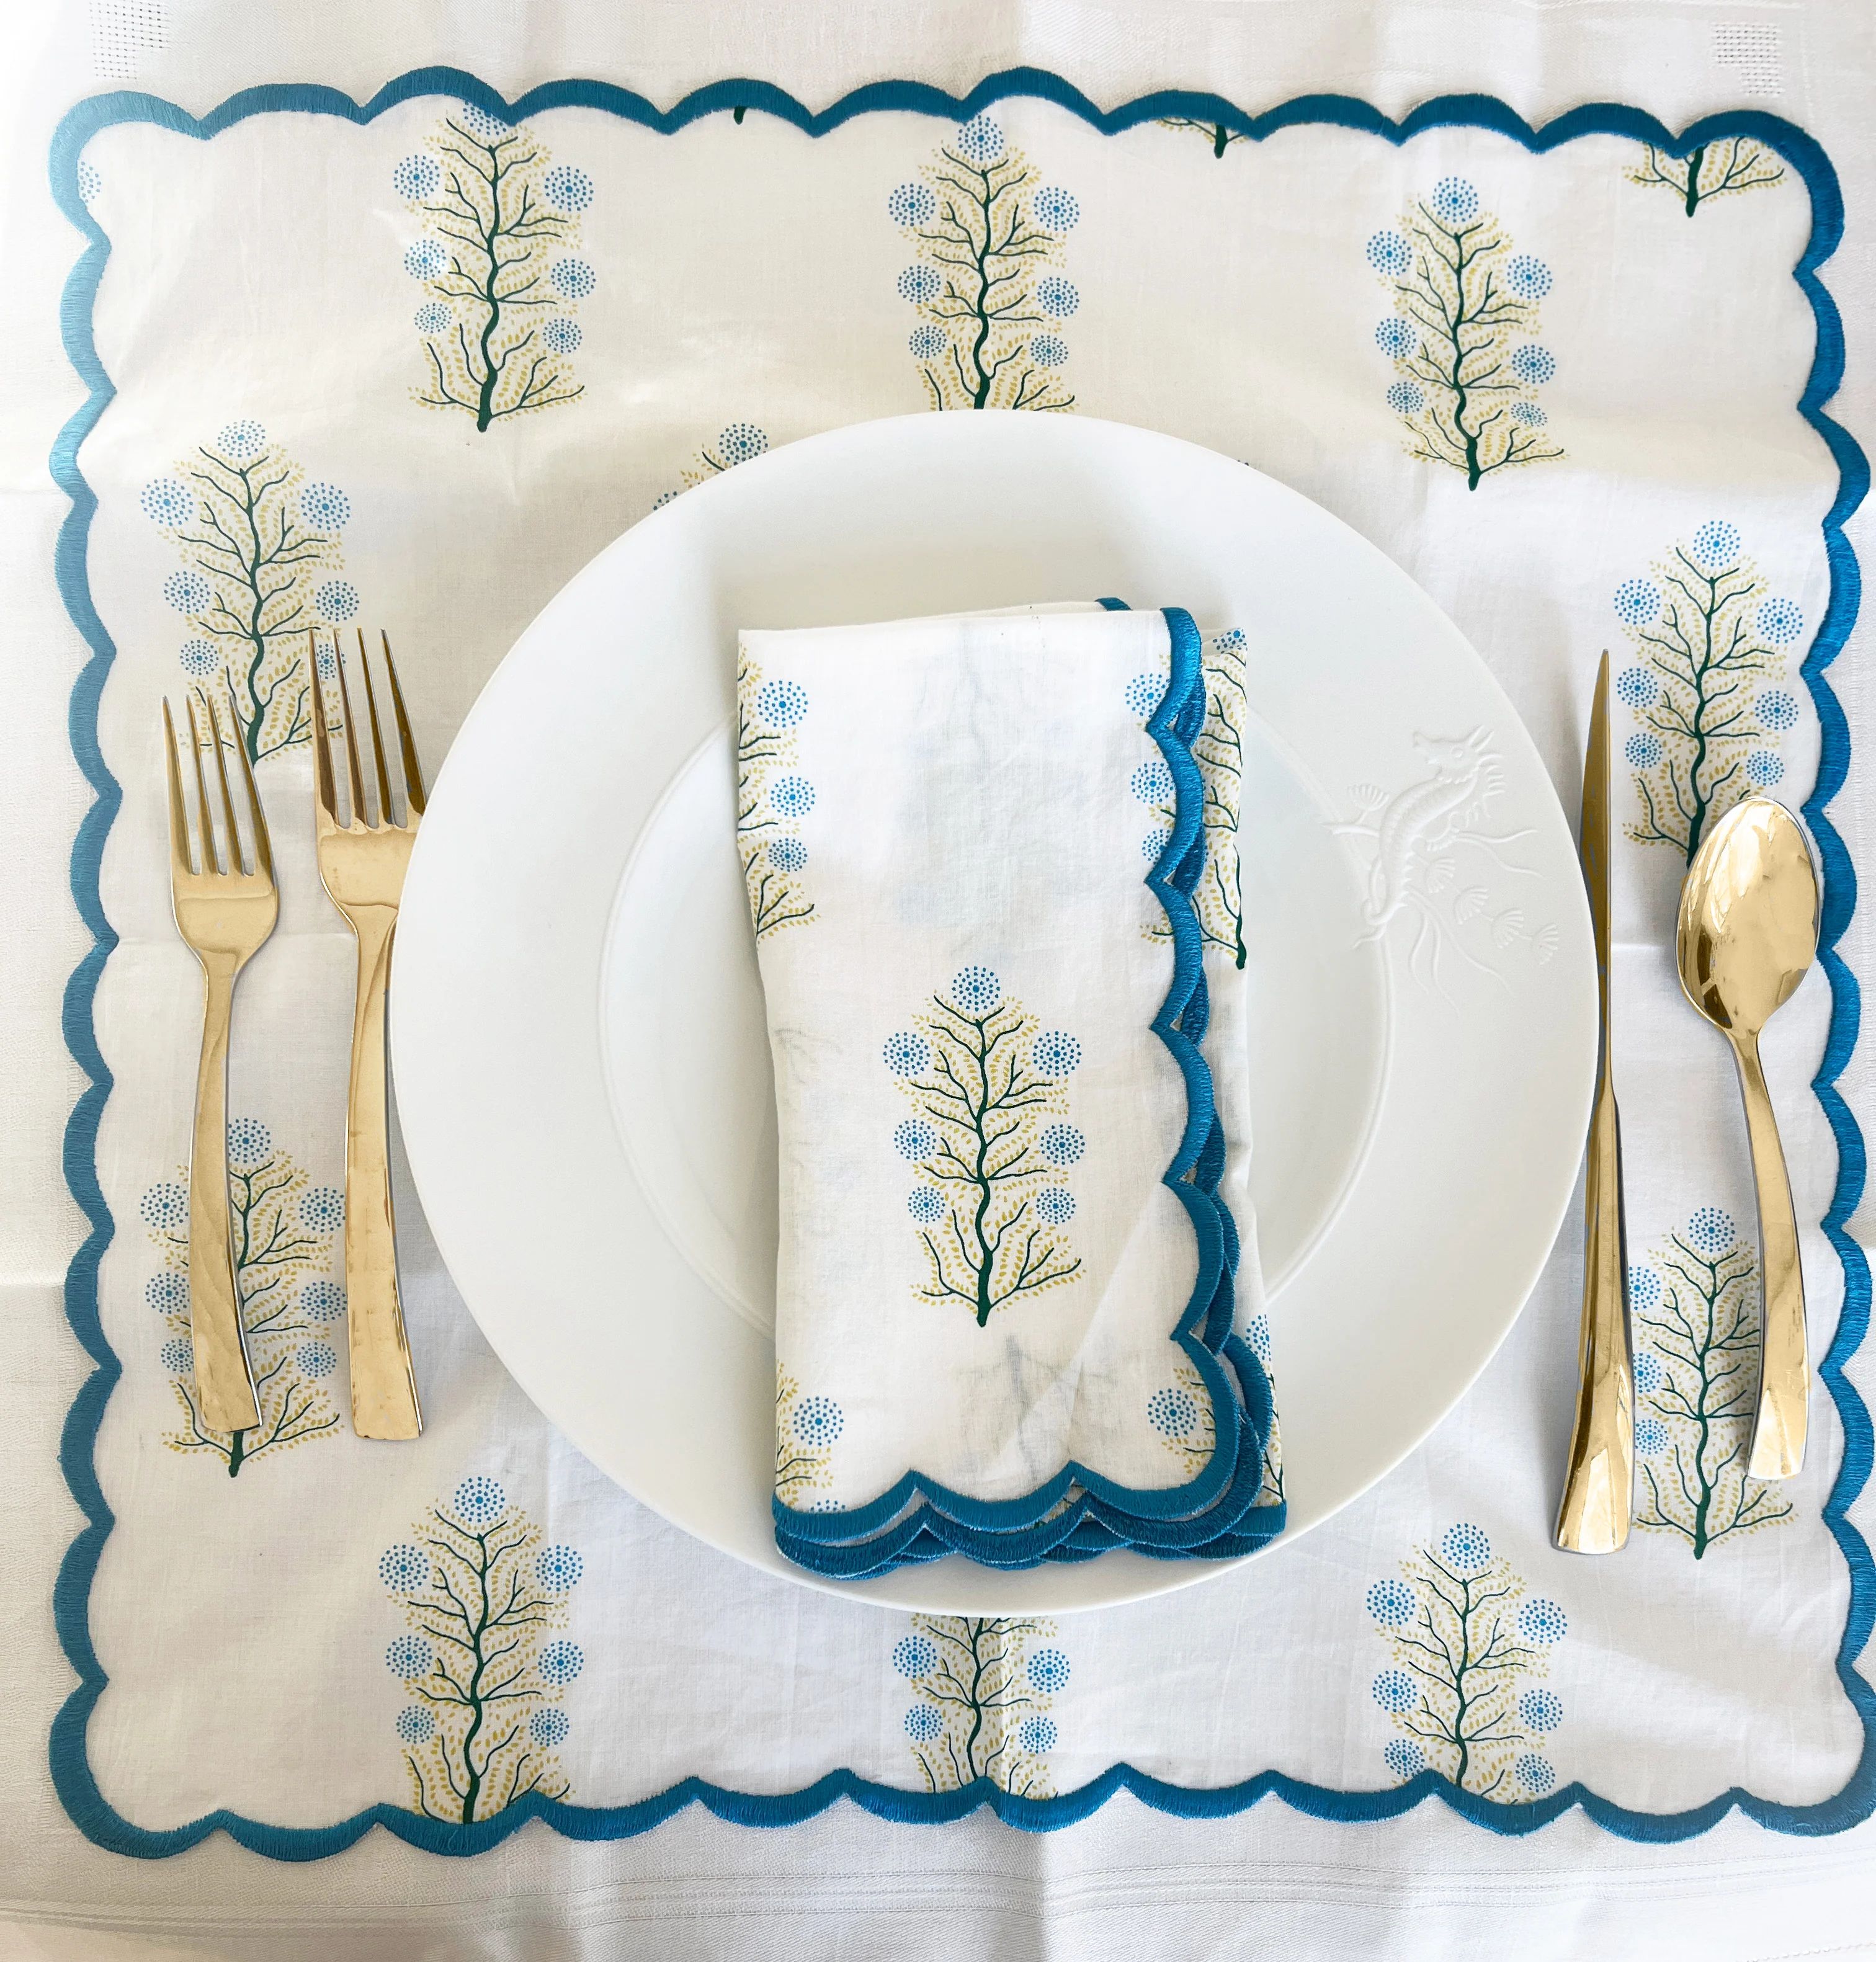 Scalloped Blue Floral Napkins | Sweet Pea and Whimsy